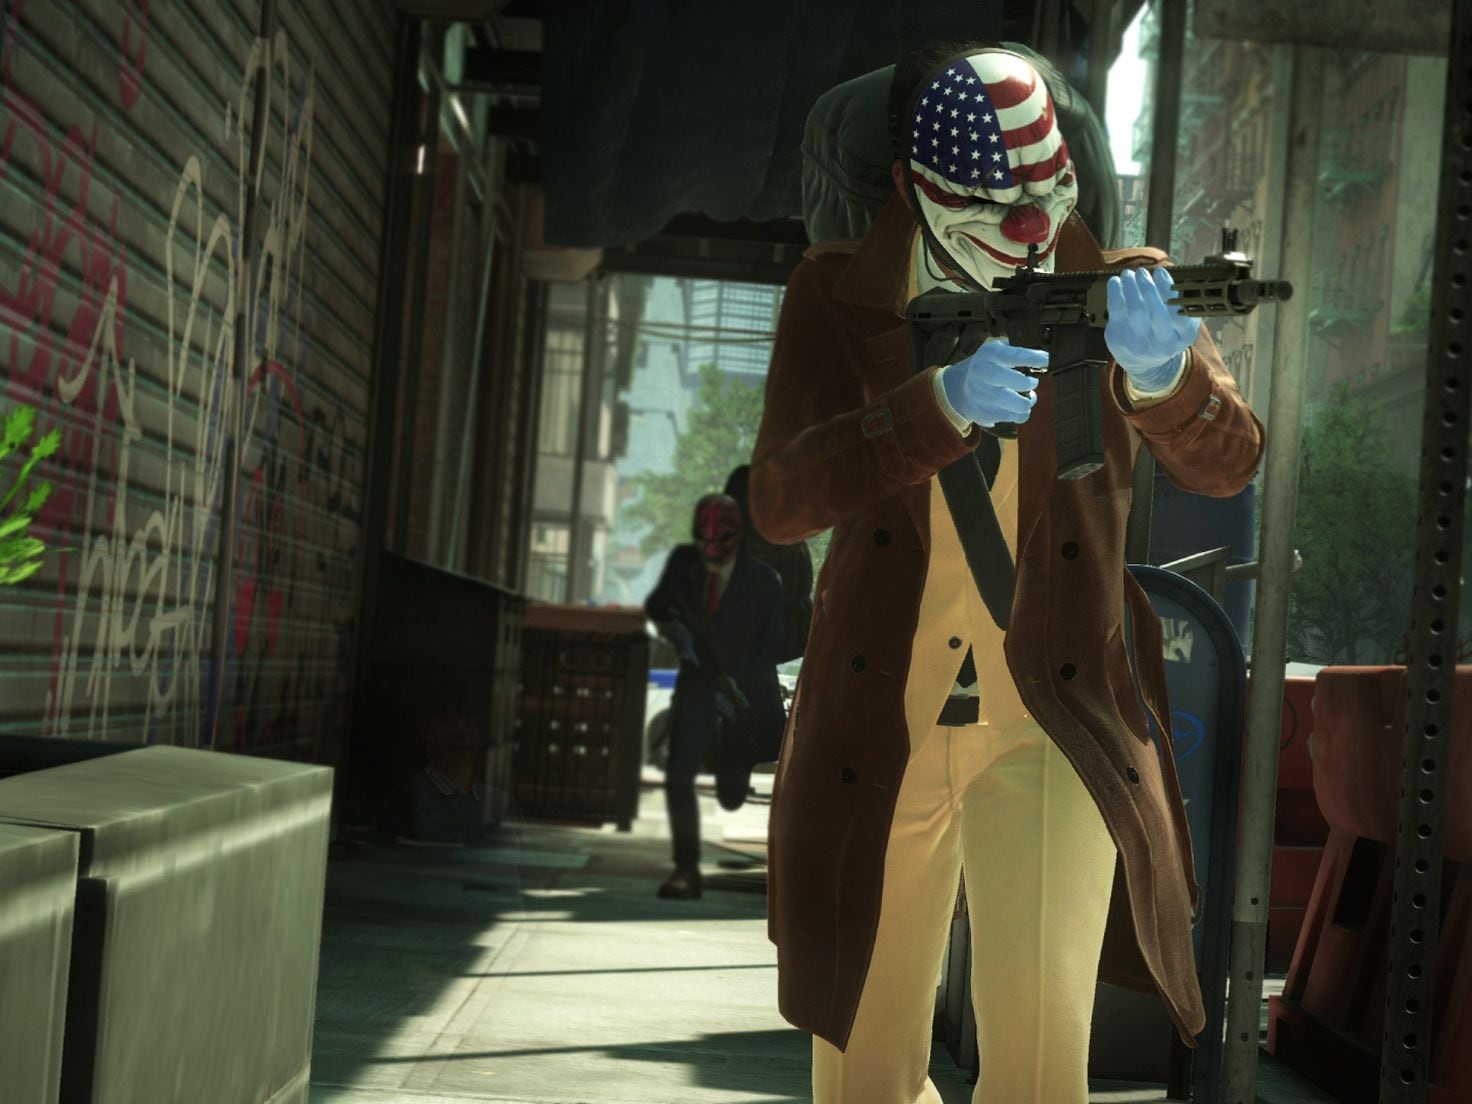 Payday 3 release date leaked, could arrive sooner than thought